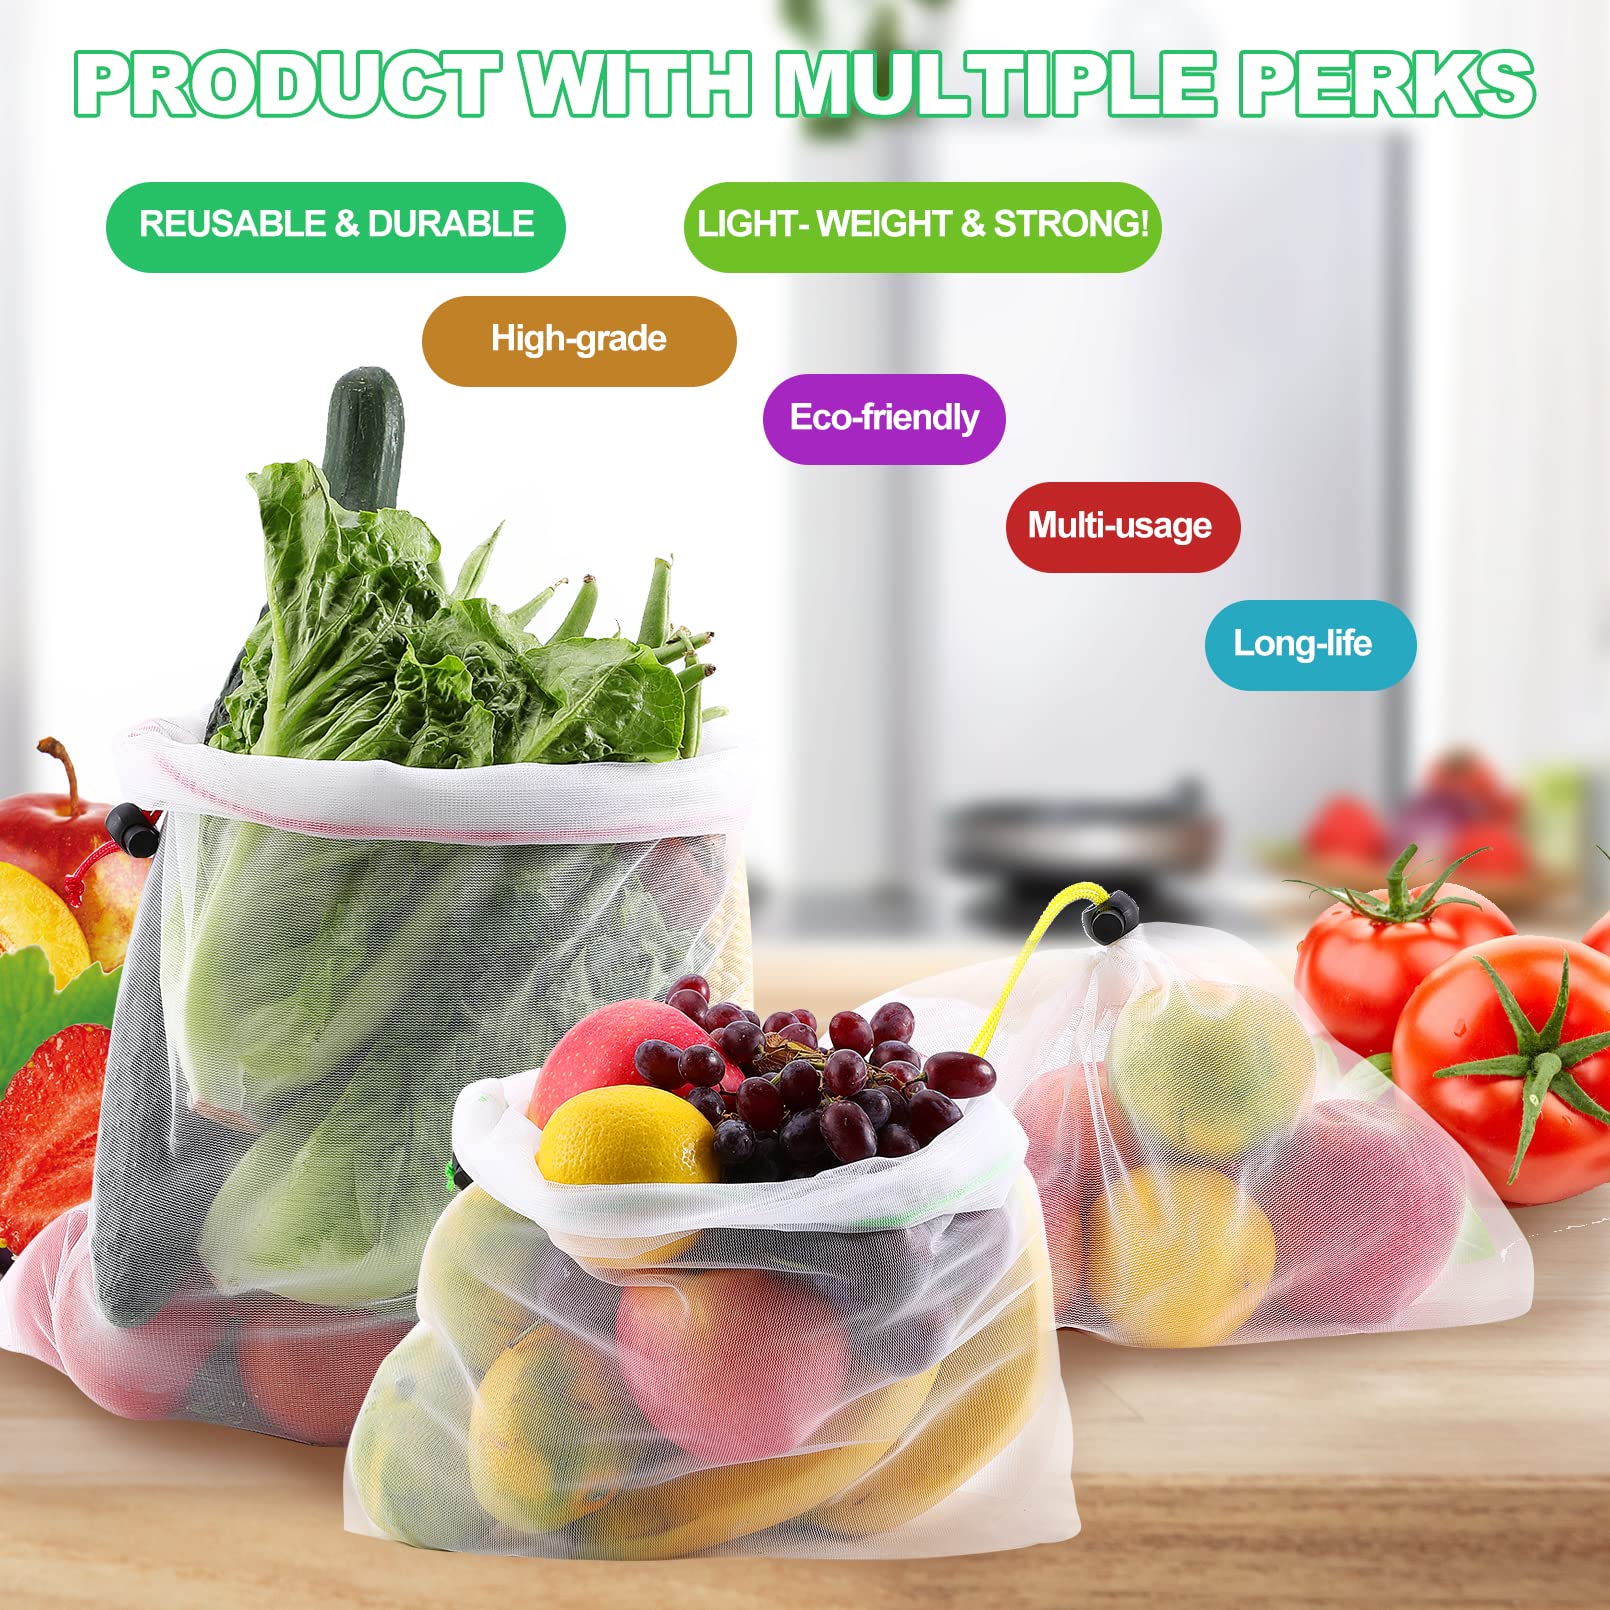 20 Pack Reusable Produce Bags,Mesh Produce Bags Washable,See-Through Vegetables Fruits Bag,Premium Strength Toy Storage Mesh Bags with Drawstring for Fruits Vegetables Fridge Storage Toys,3 Sizes